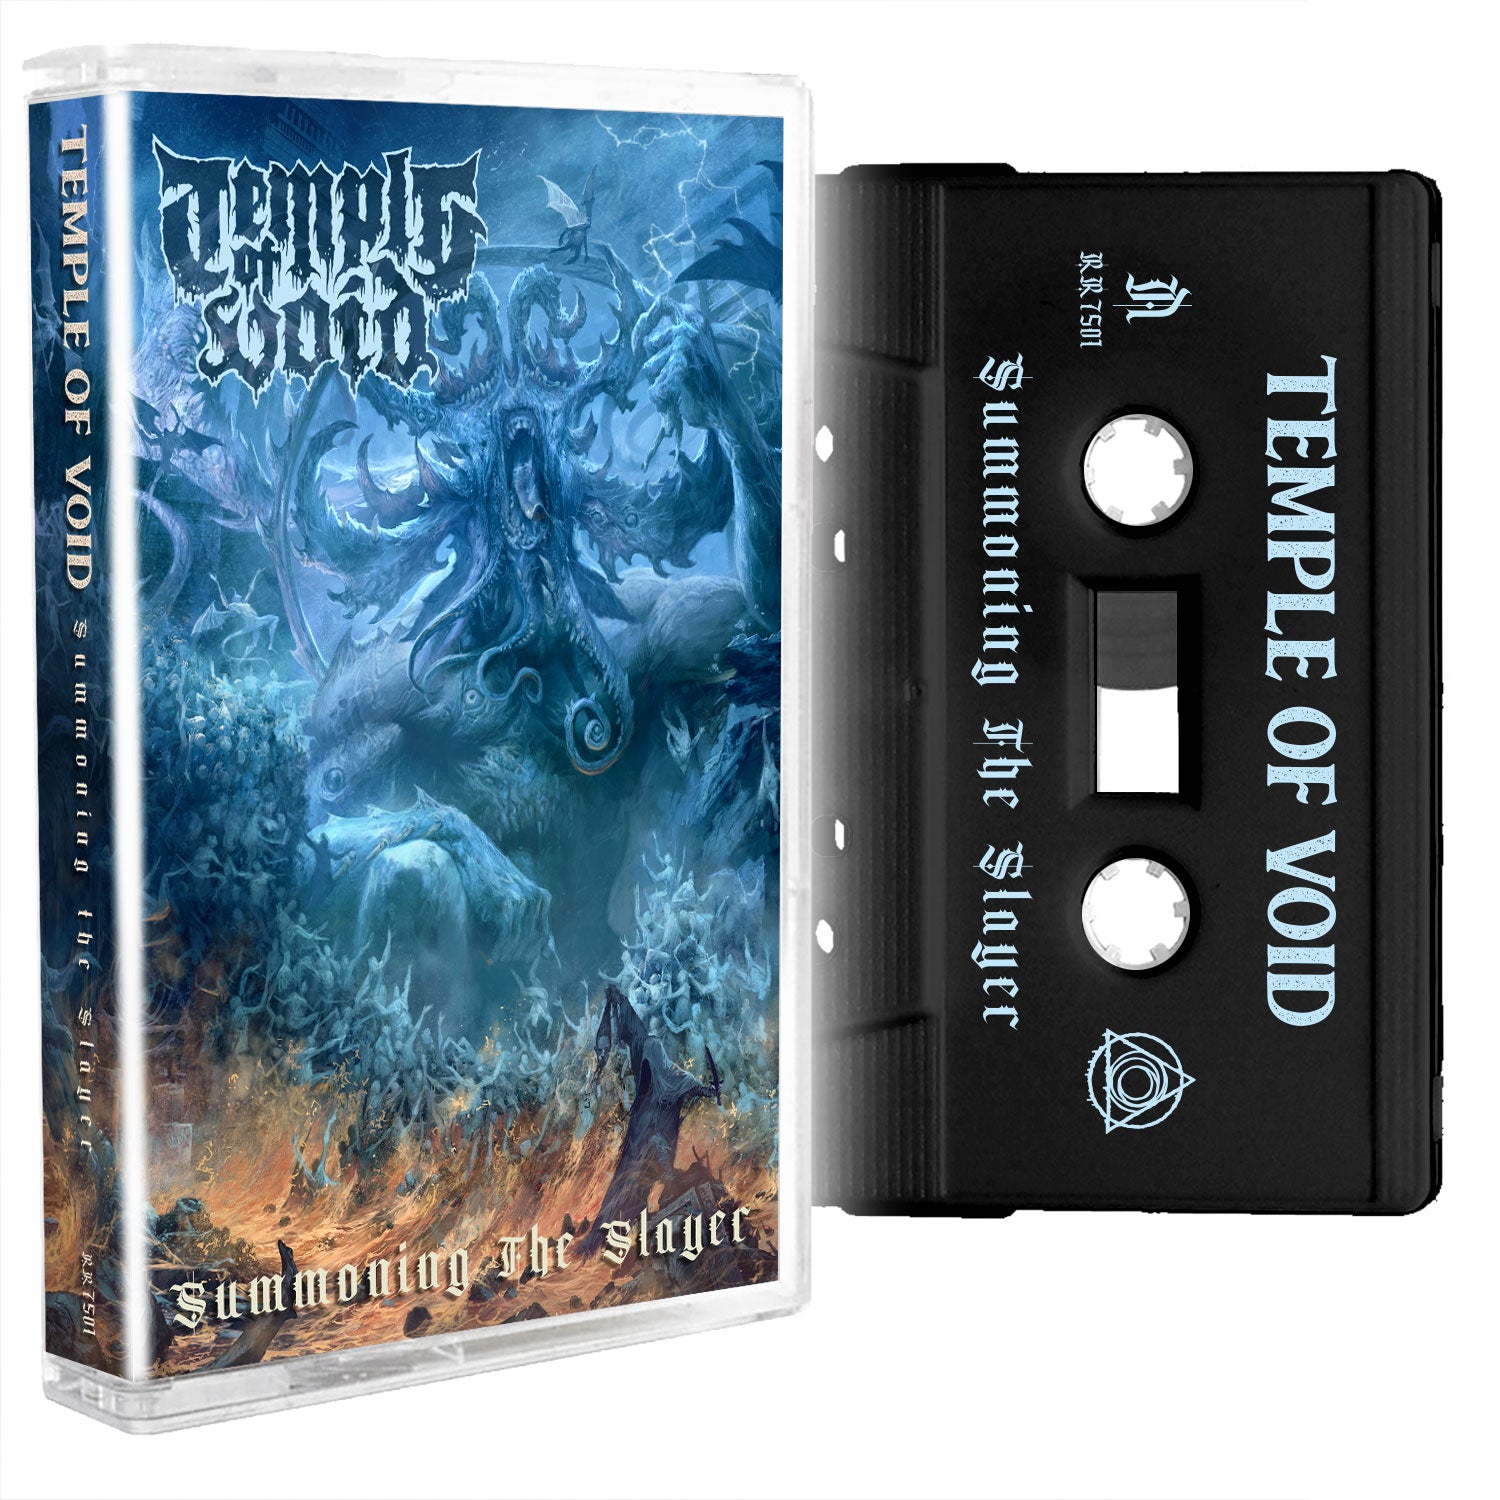 Temple of Void "Summoning the Slayer" Cassette